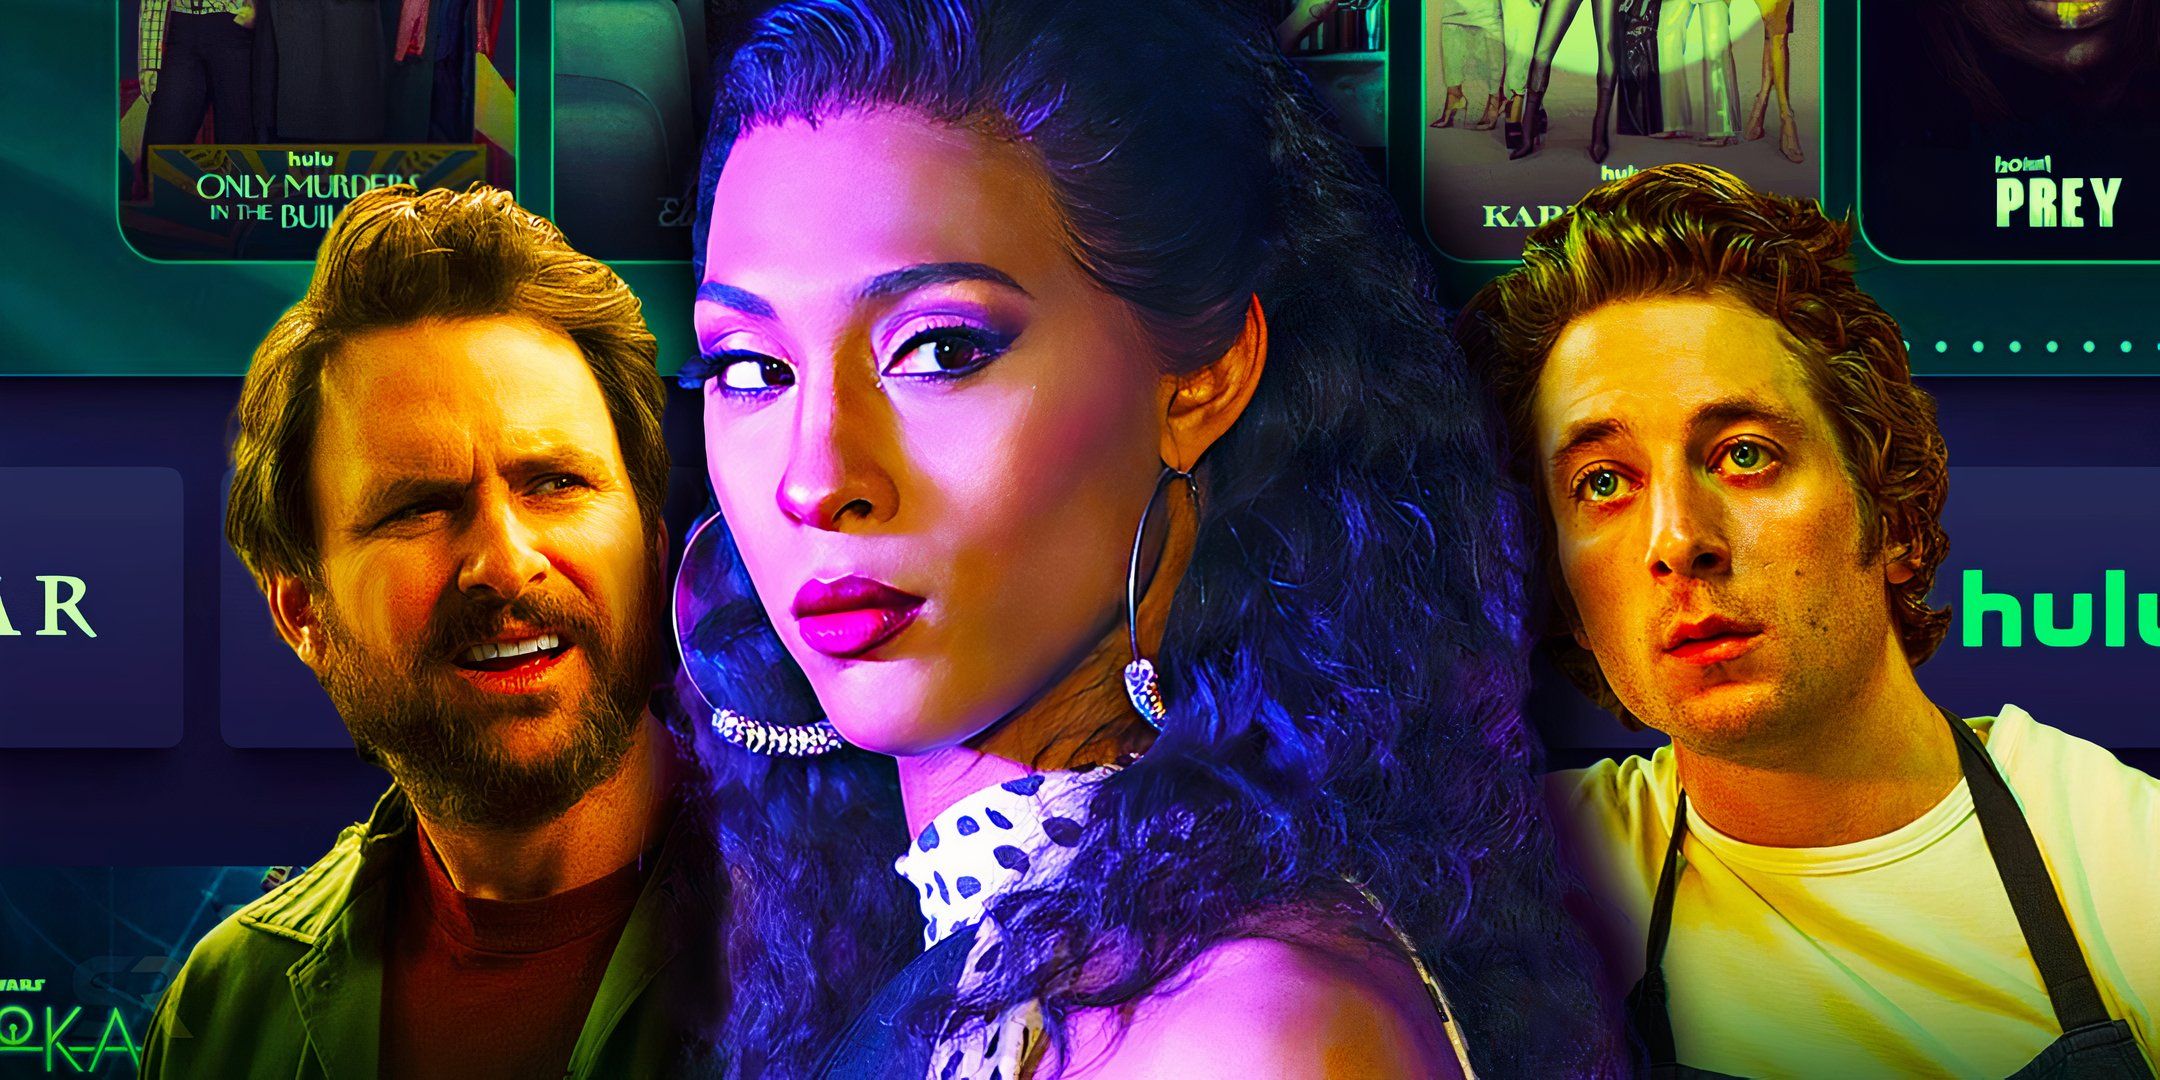 Custom image of Charlie Day, Michaela Jaé Rodriguez, and Jeremy Allen White against the Hulu home page.